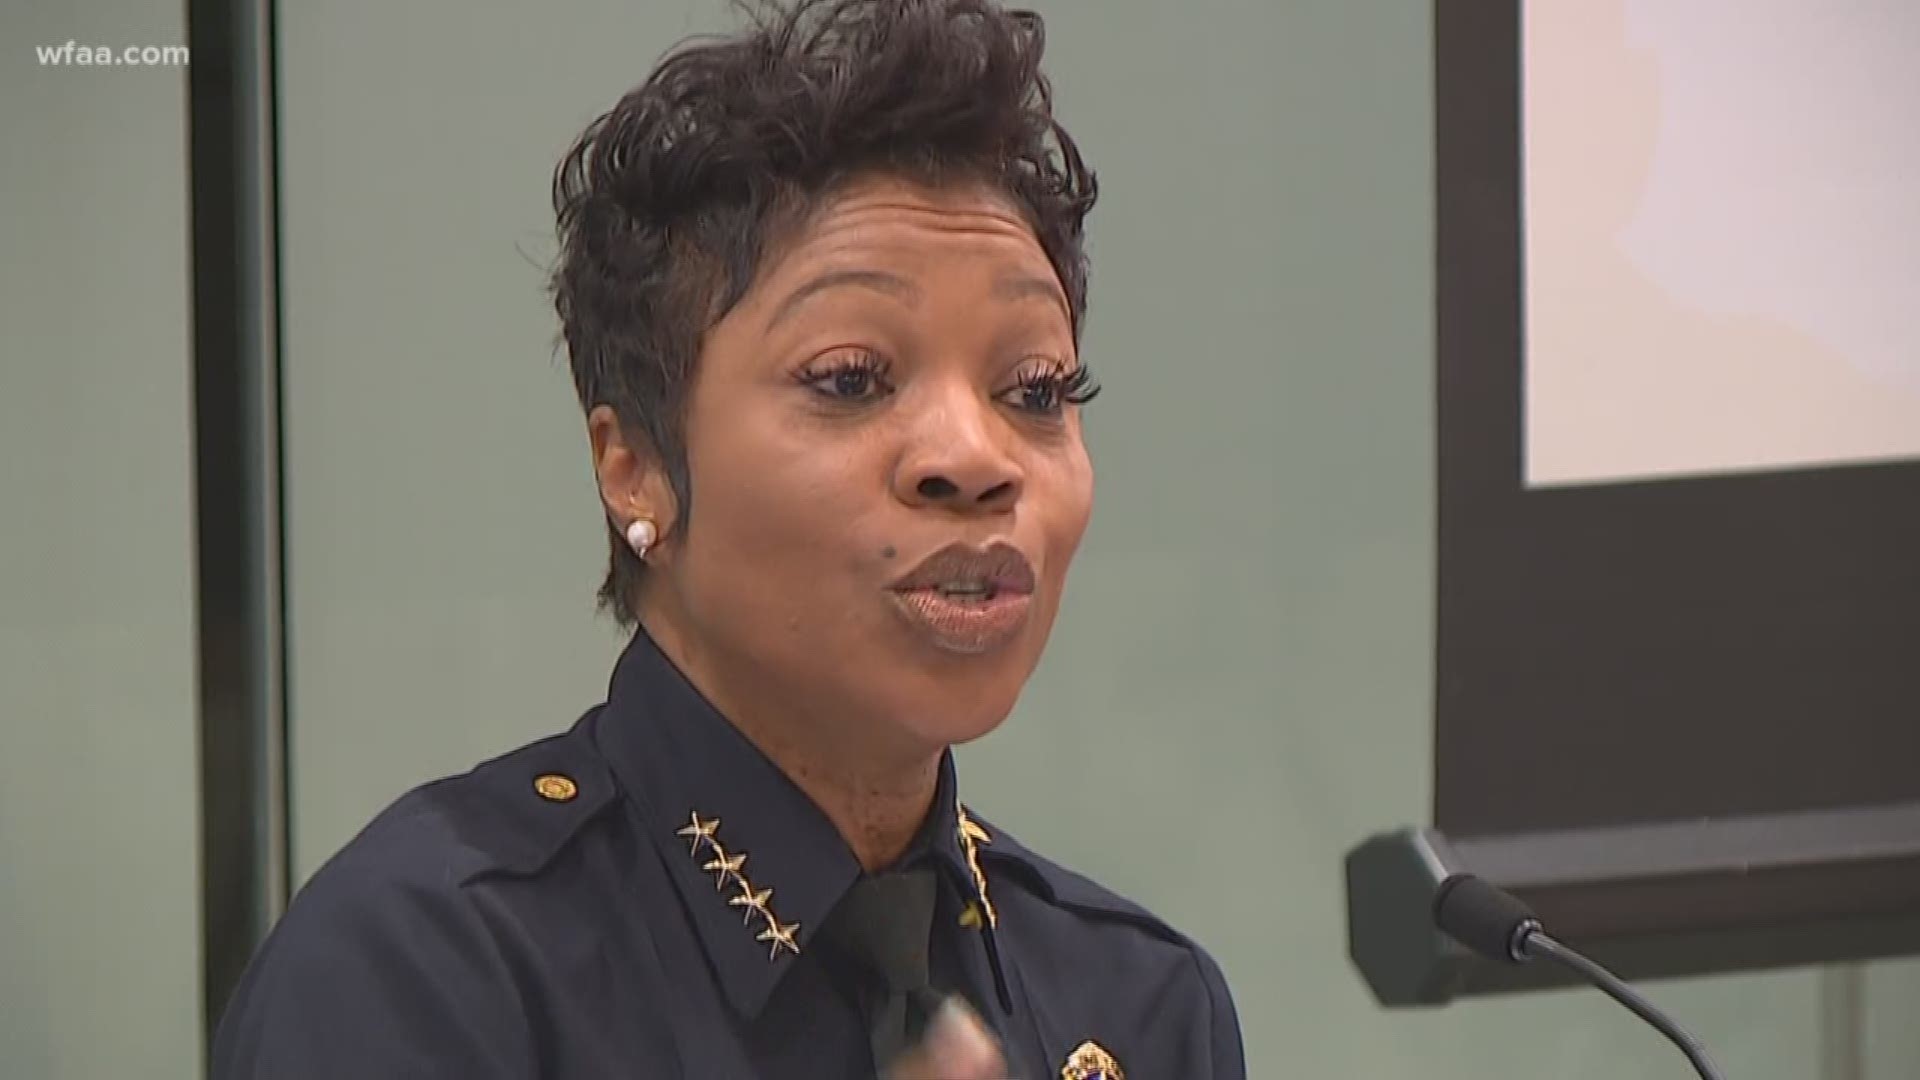 Dallas Police Chief Renee Hall has been on leave since July 10.